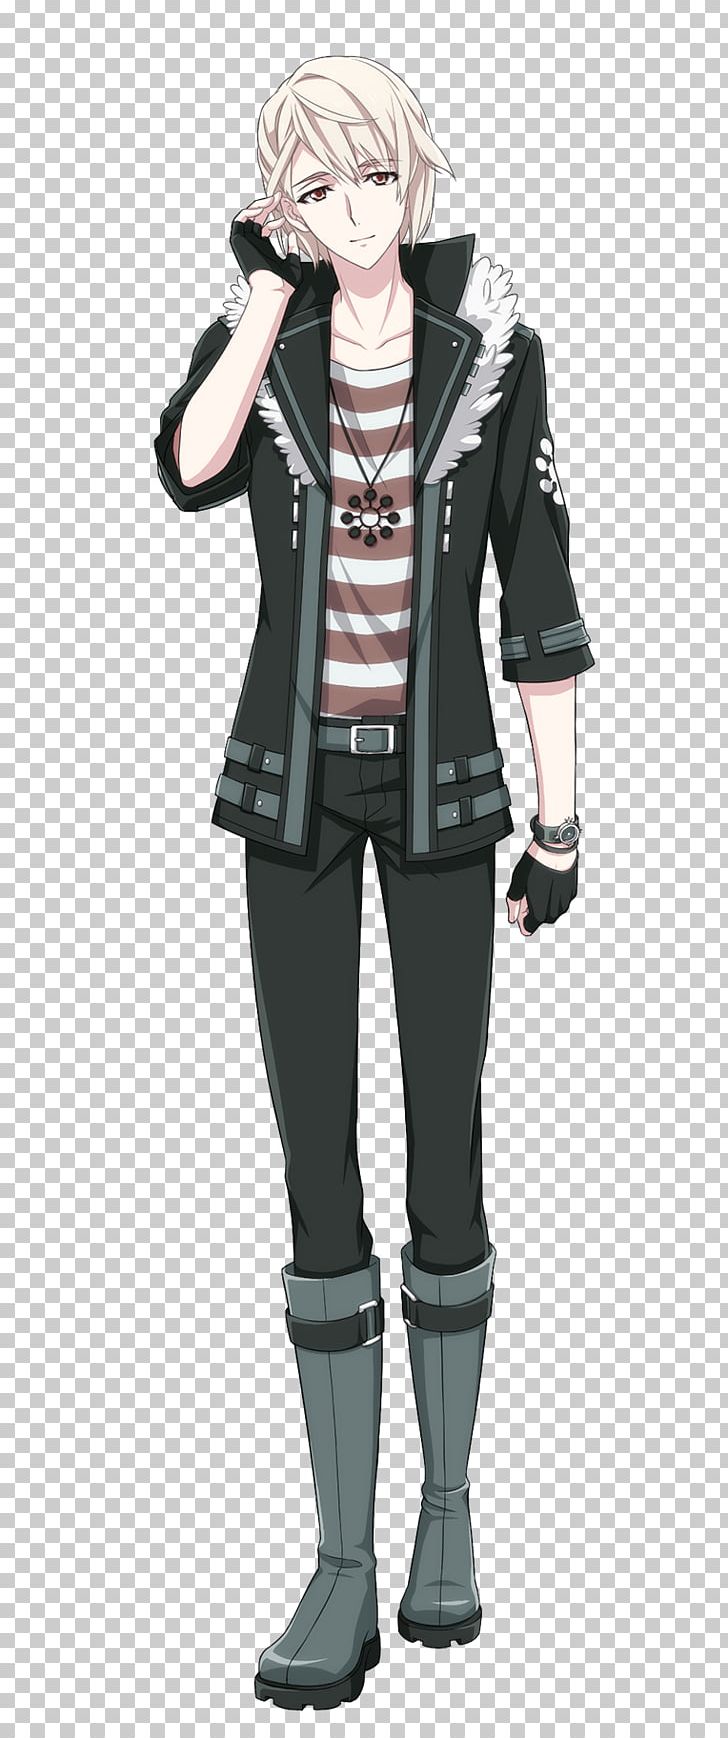 IDOLiSH7 ZOOL WiSH VOYAGE ピタゴラス☆ファイター Costume PNG, Clipart, Anime, Cosplay, Costume, Costume Design, Fictional Character Free PNG Download